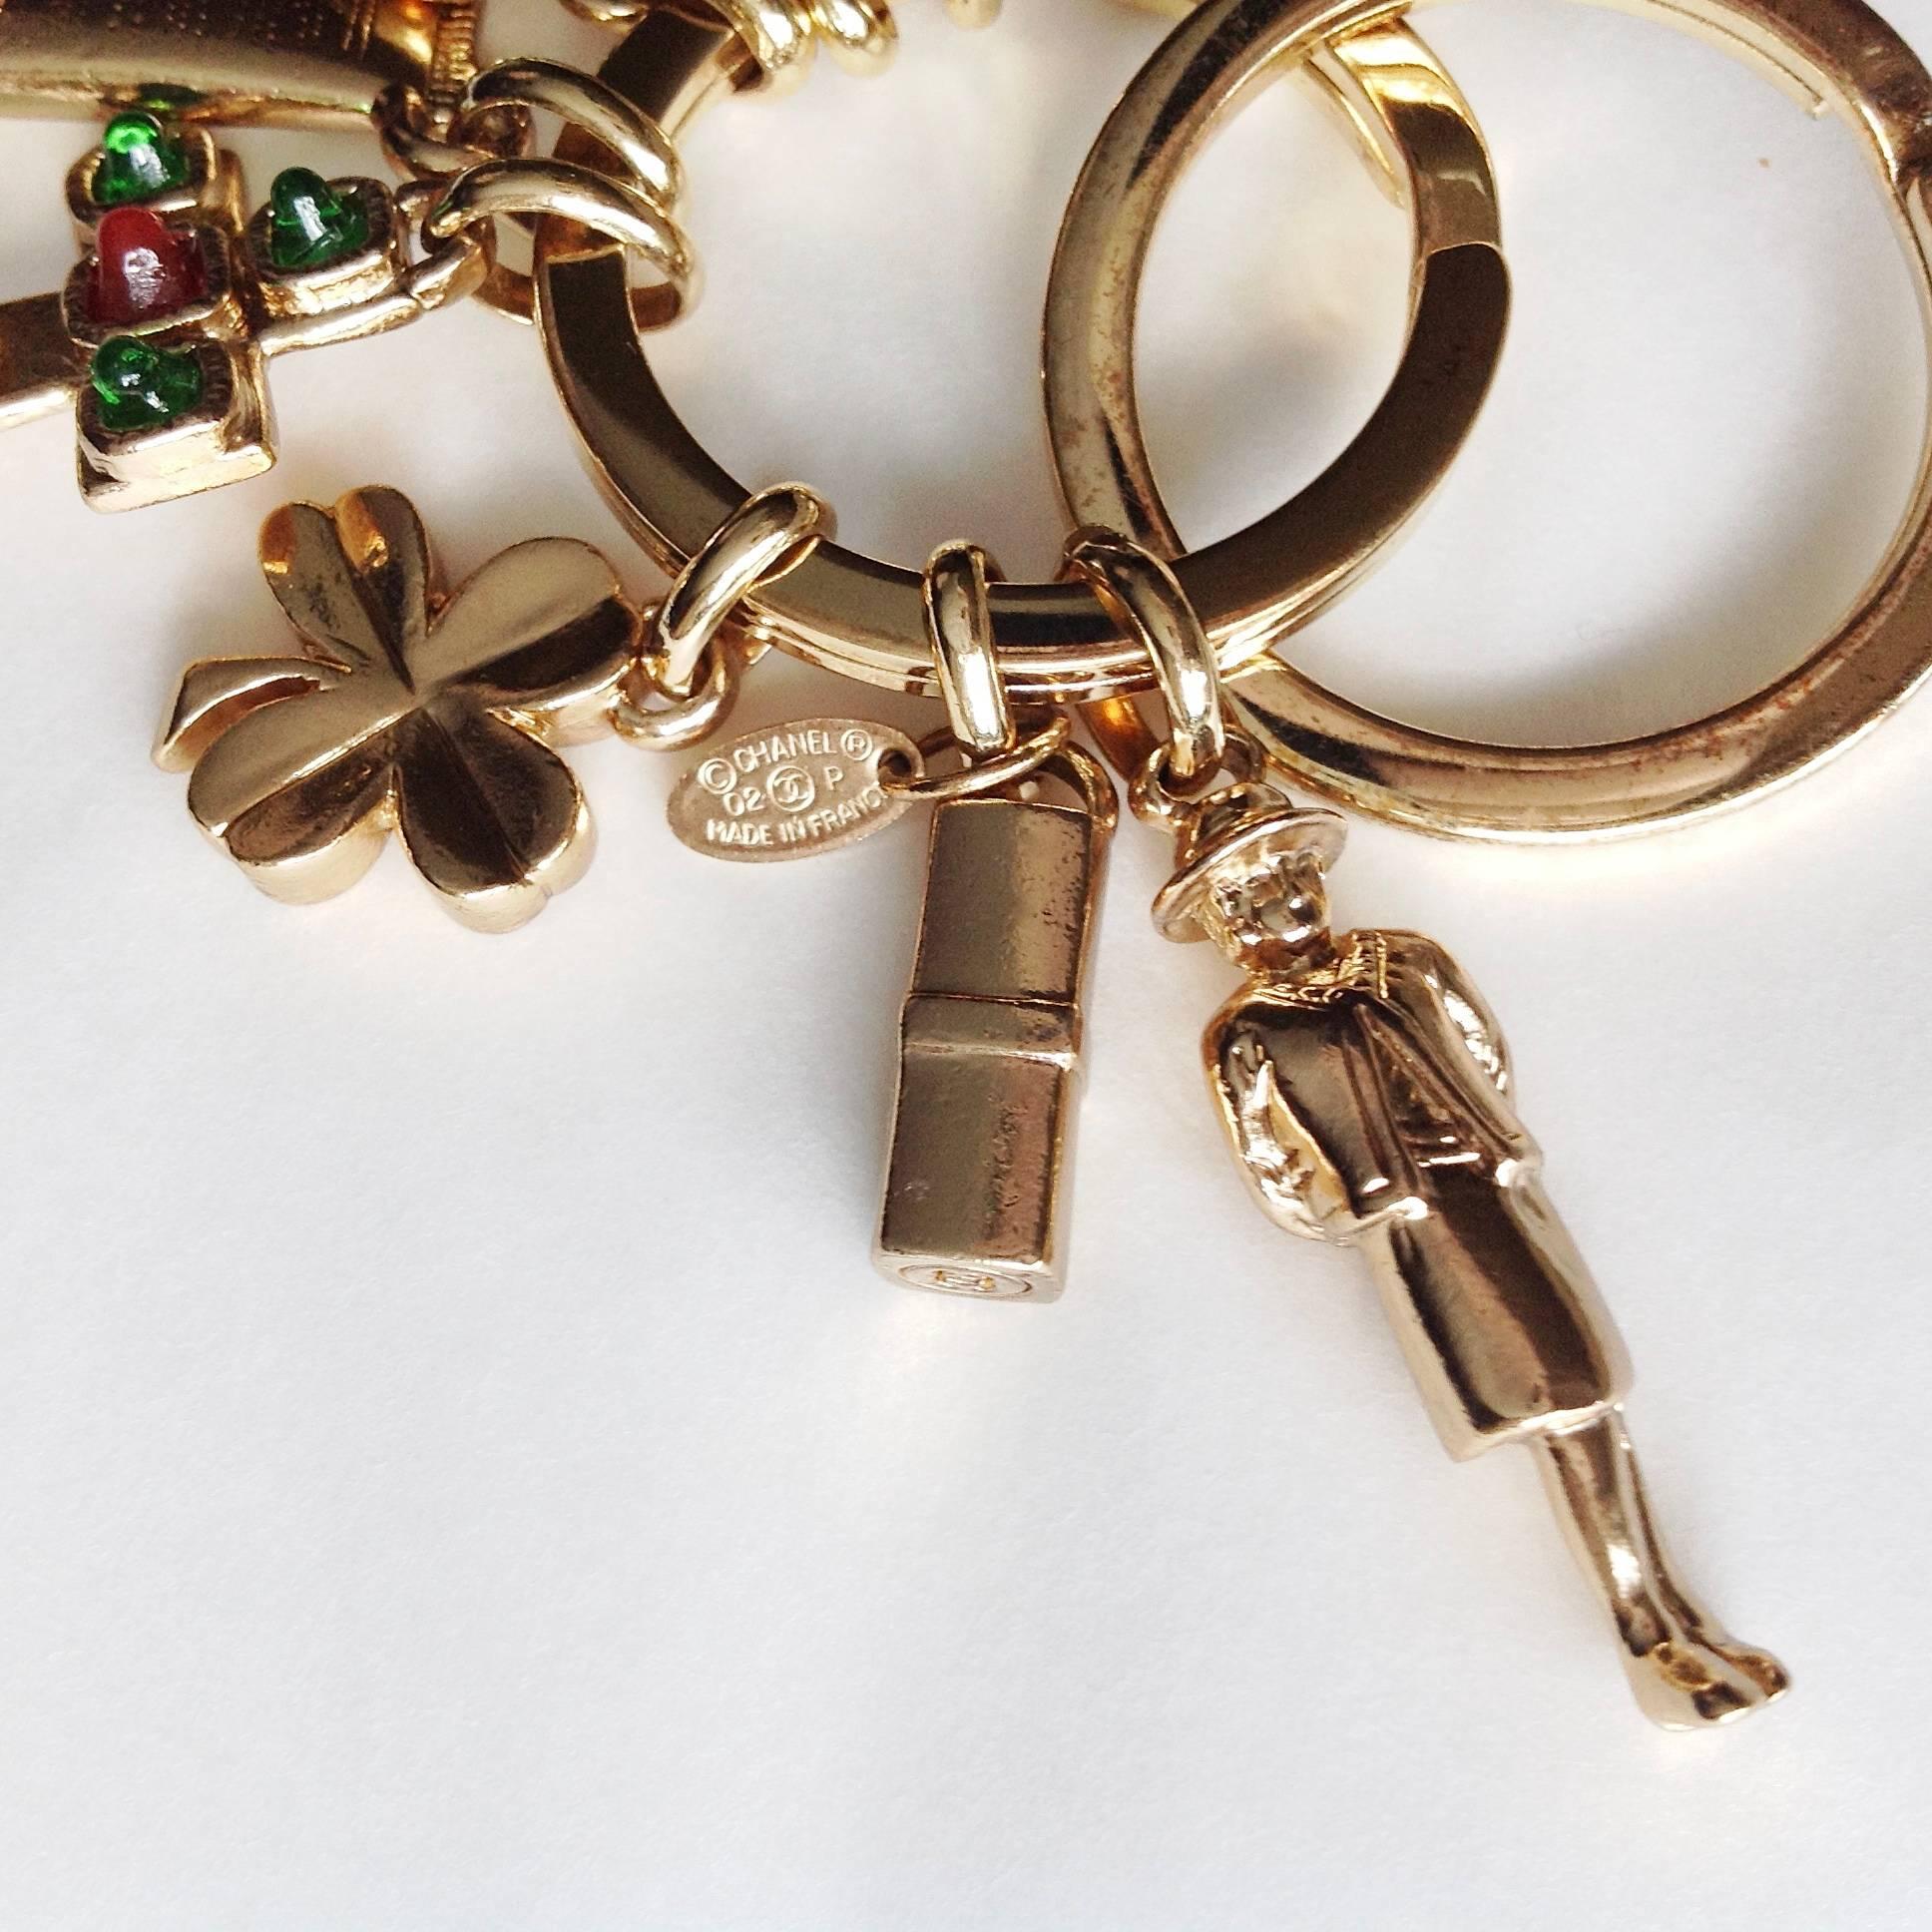 This collectors' 2002 P double rings keyring is so complete with all iconic charms, such as sunglasses, heart, Gripoix glass cross, facial cream, shamrock, lipstick, Coco herself, sanders an CC logo. This key ring can be also used as a necklace